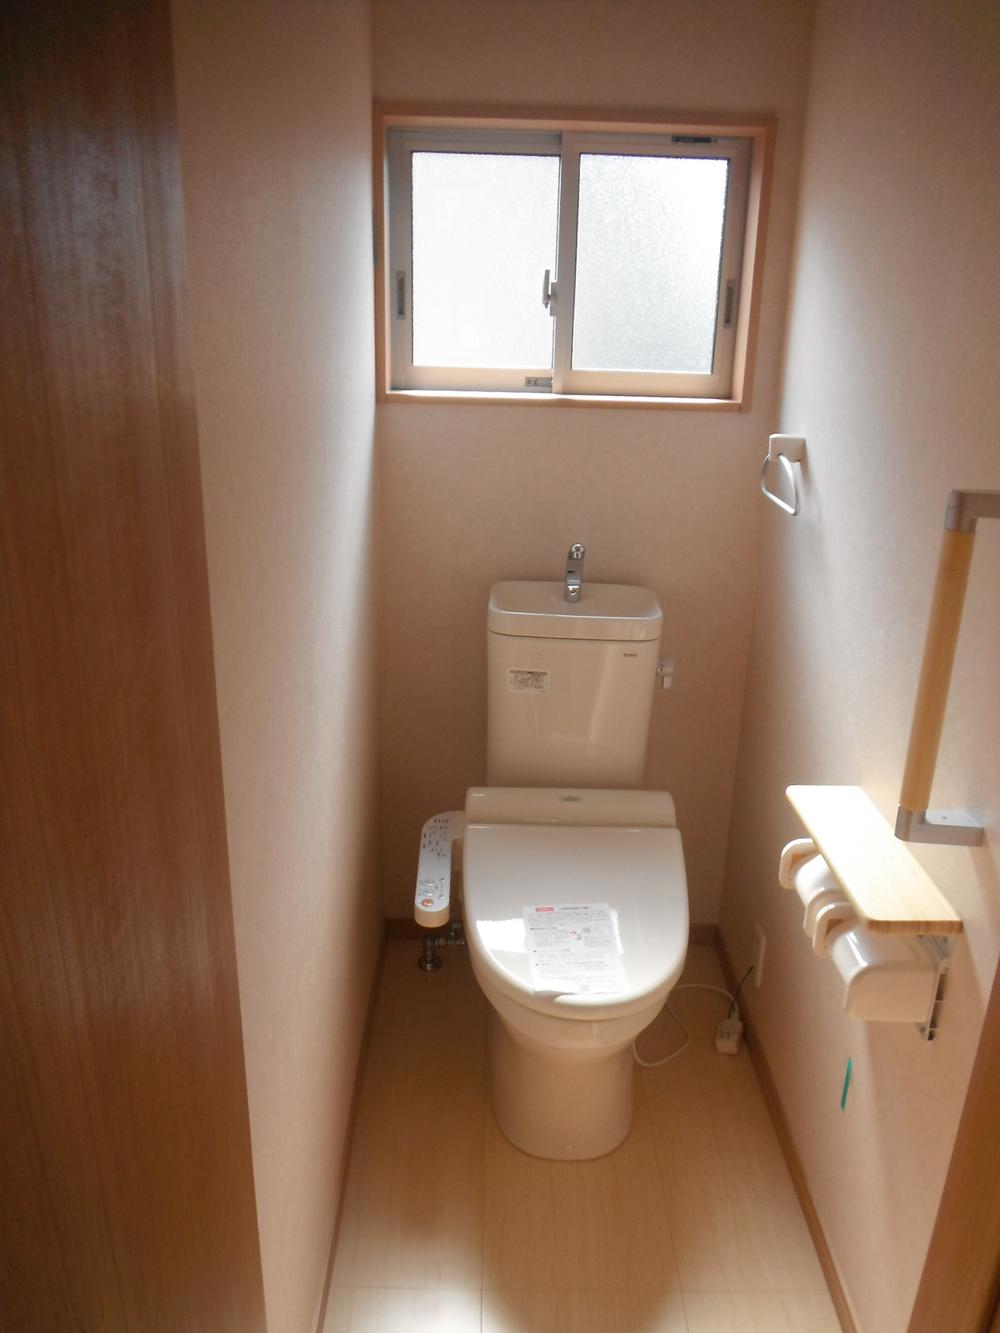 Toilet. There is also a toilet on the second floor. (It is with washlet. )